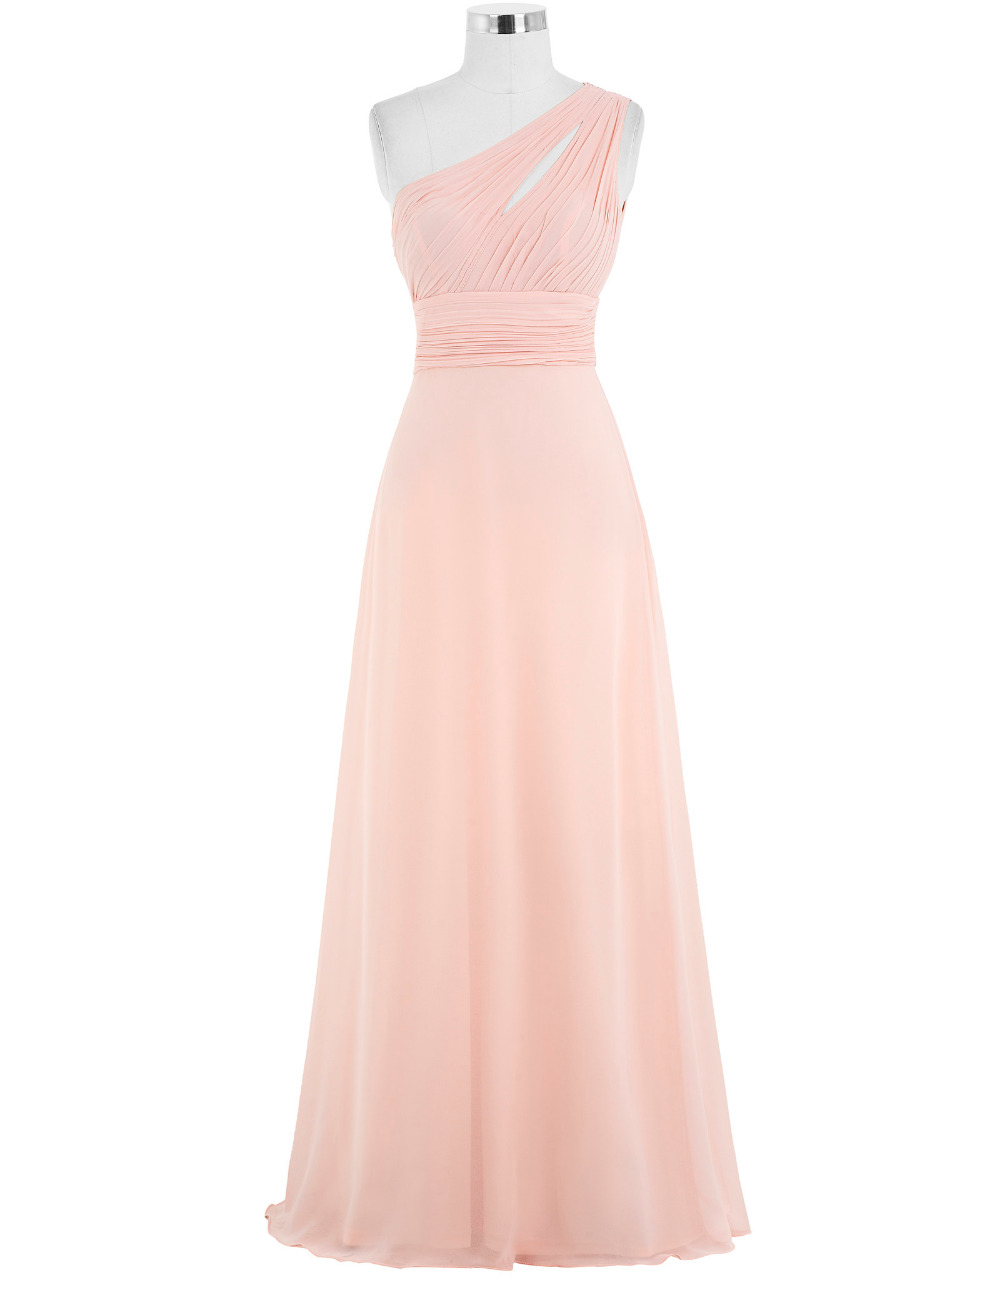 Pink Chiffon Floor Length A-line Prom Dress Featuring Ruched One Shoulder Bodice And Cutout Detailing